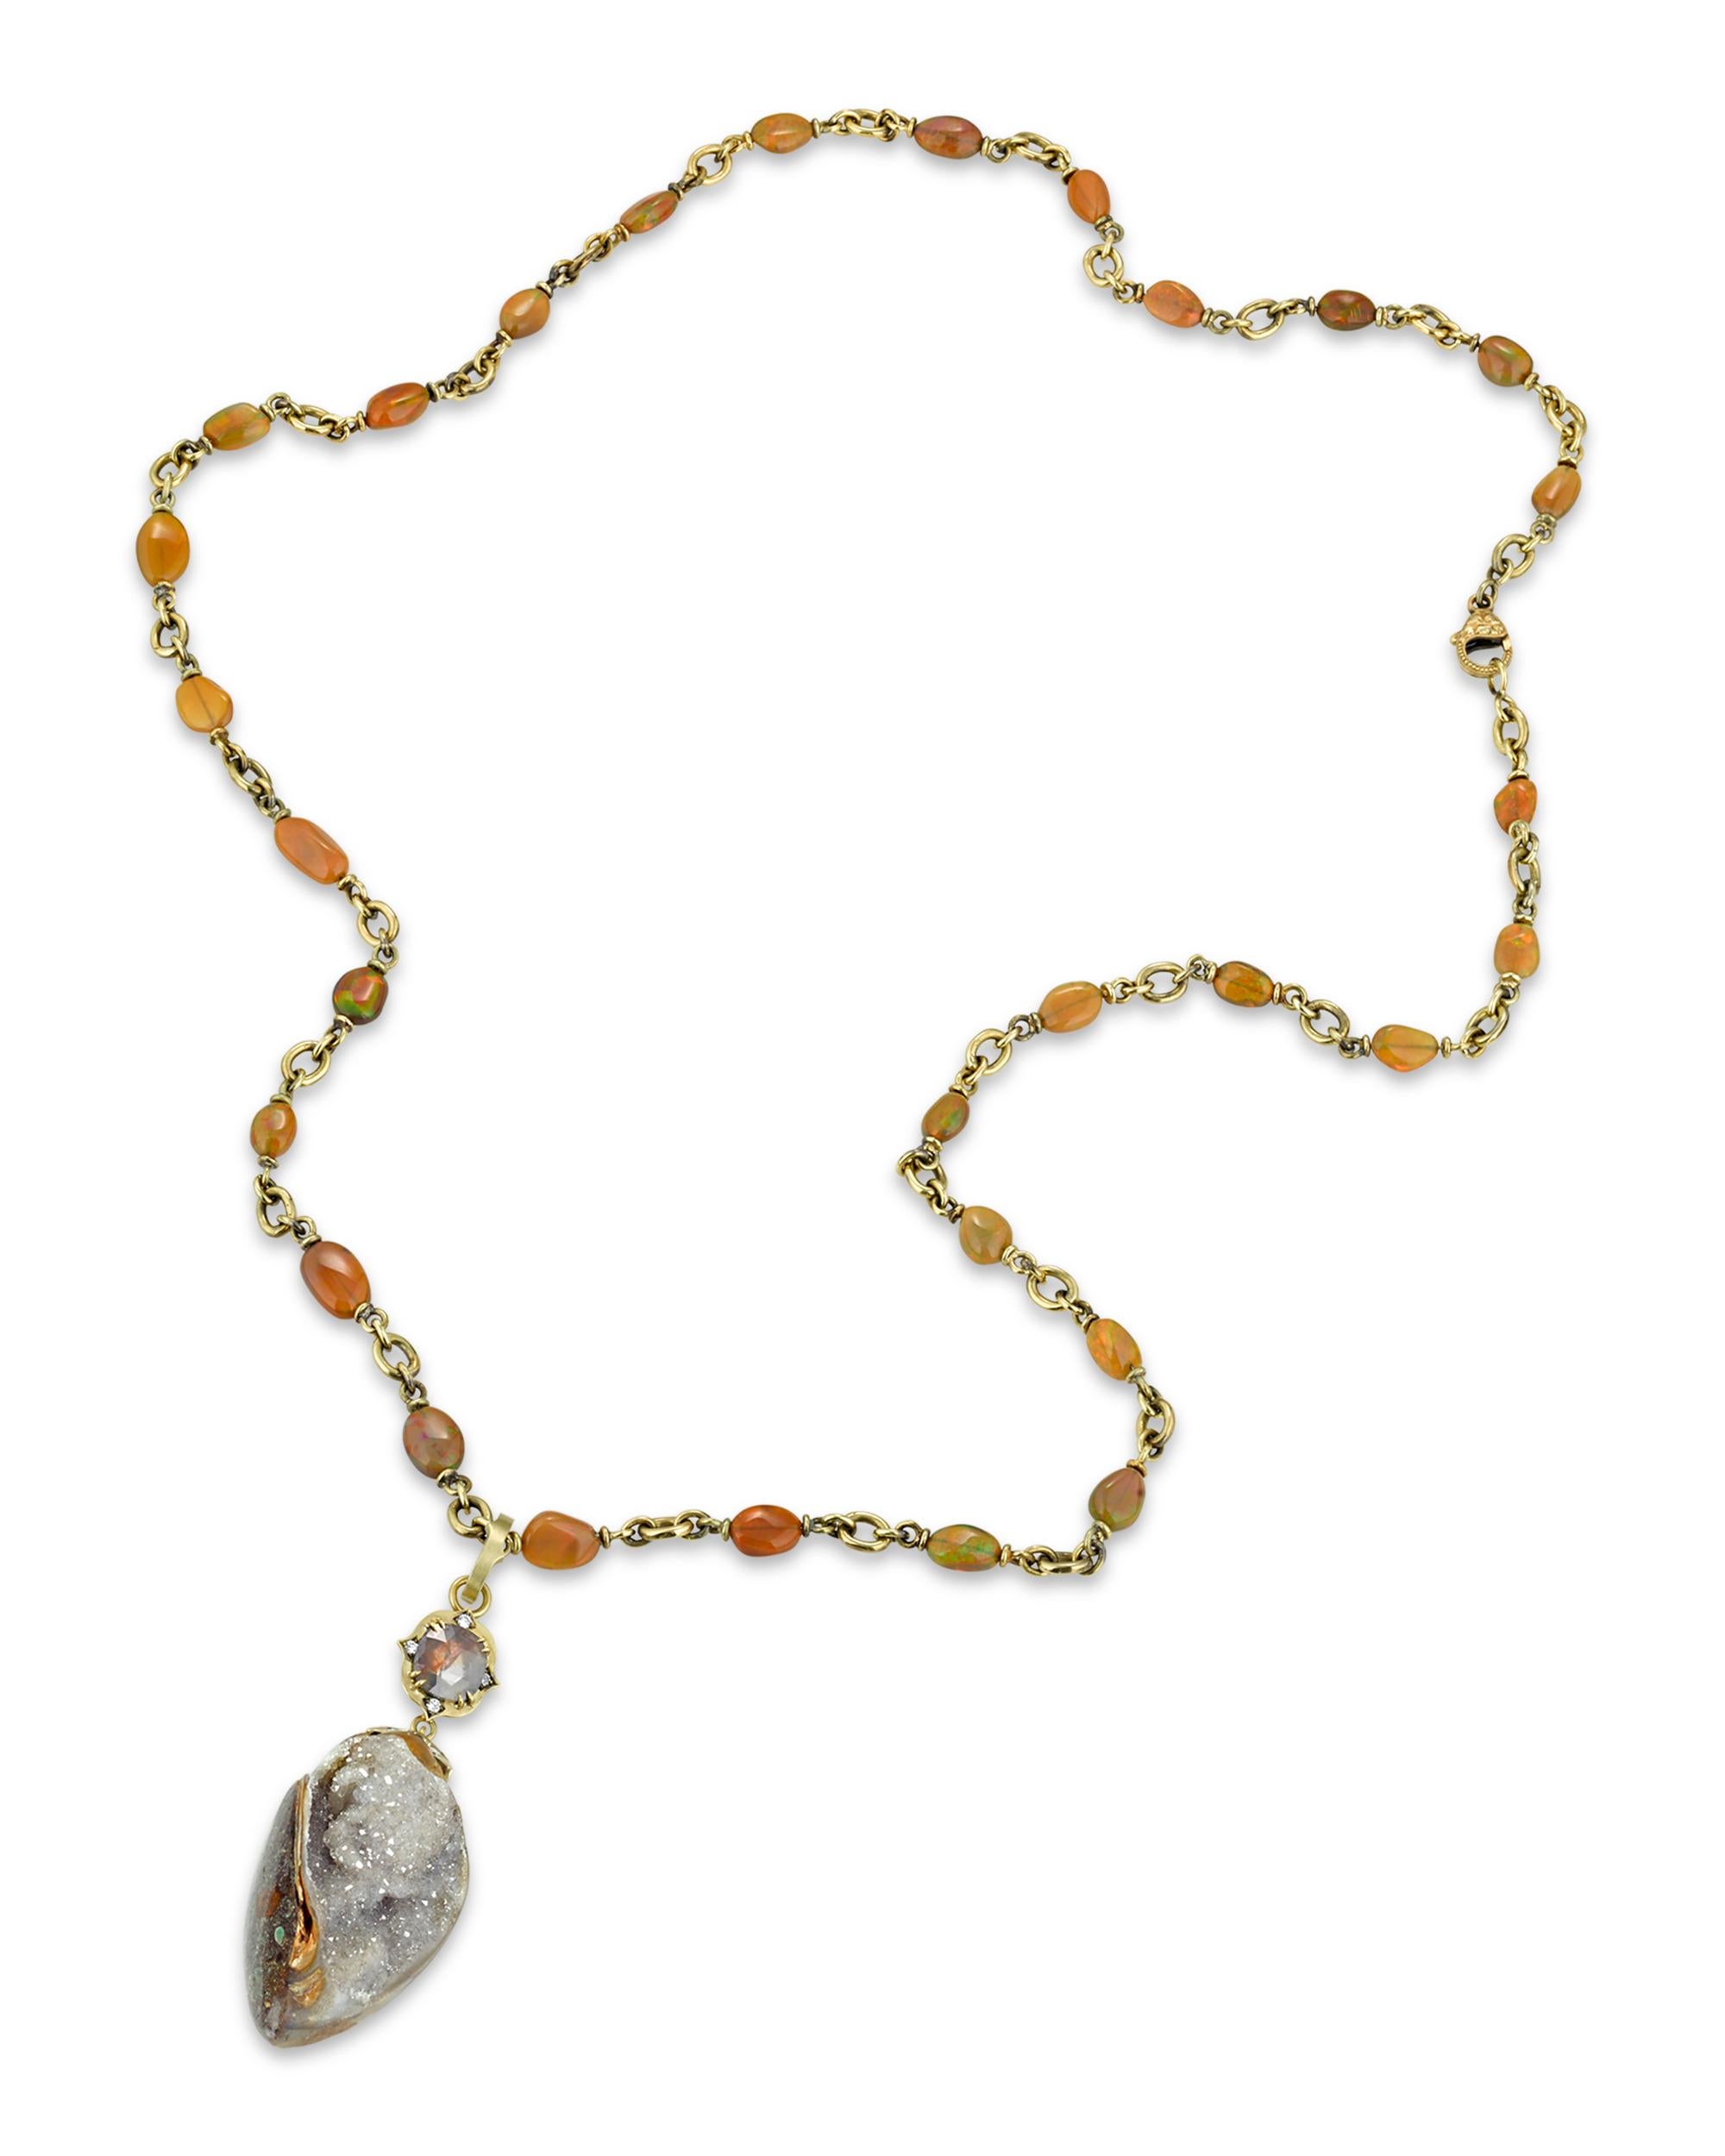 This one-of-a-kind necklace was crafted by the Los Angeles-based jewelry designer Sylva & Cie. The timeless design displays an organic beauty thanks to the dazzling crystalized fossil shell that forms the pendant. The hand-crafted chain is formed